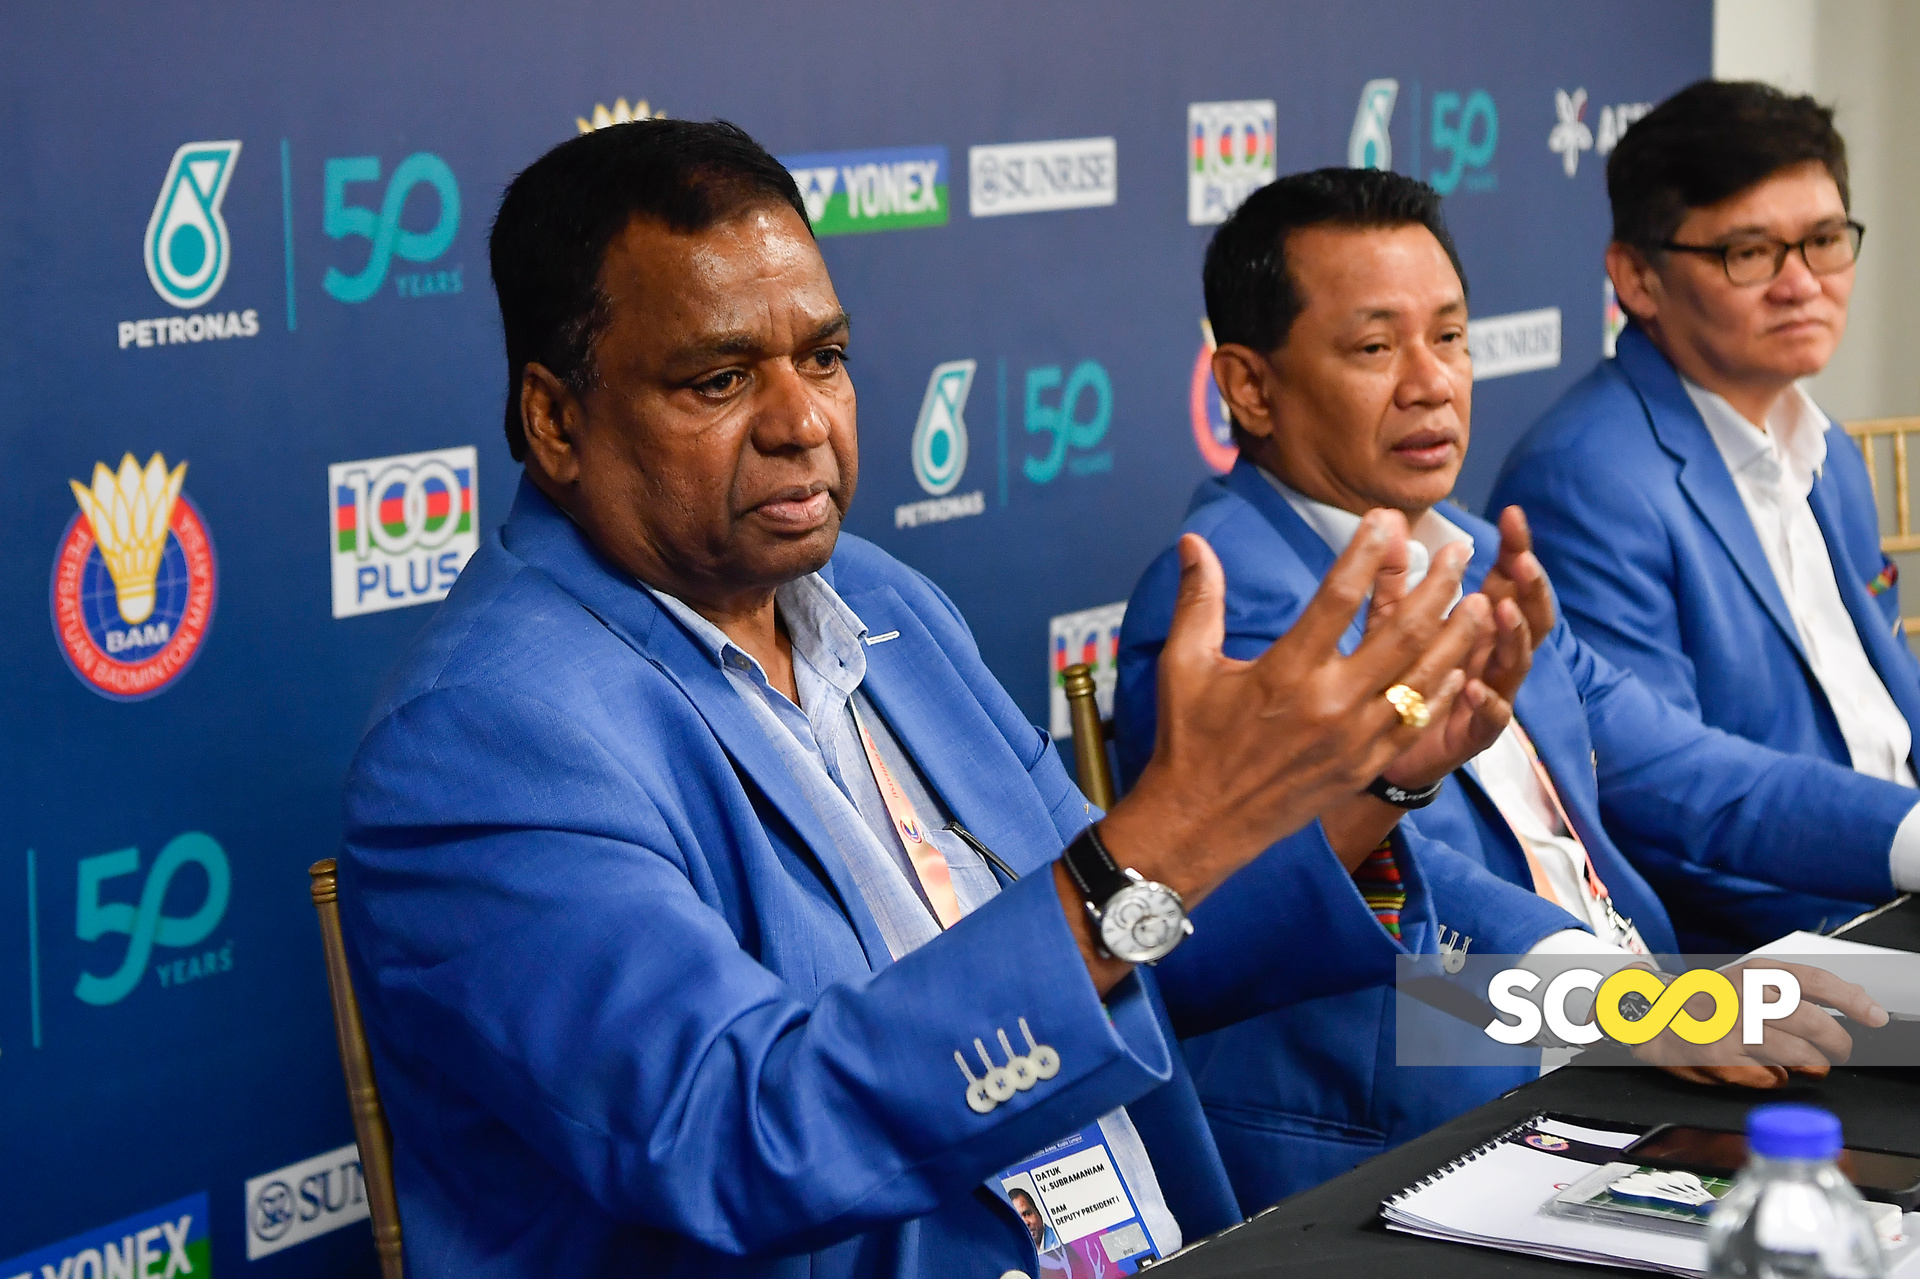 BAM appoints deputy president Subramaniam as acting president, effective after Olympics